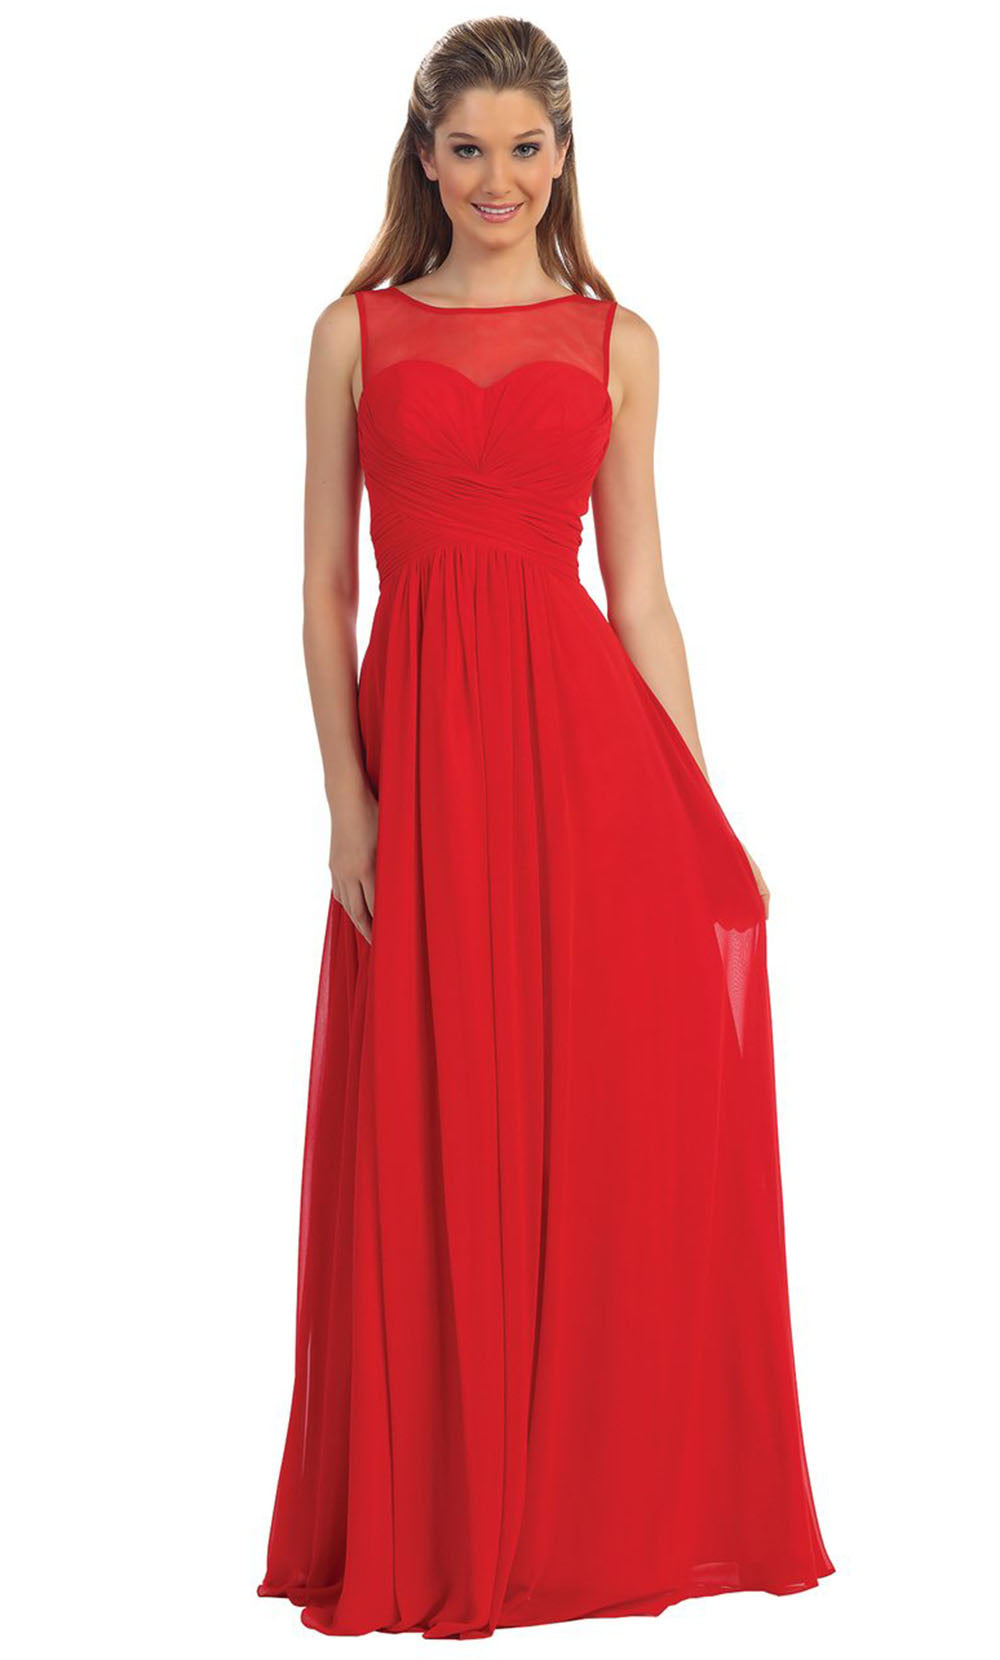 Dancing Queen - 9202 Illusion Neckline Ruched Bodice A-Line Gown In Red